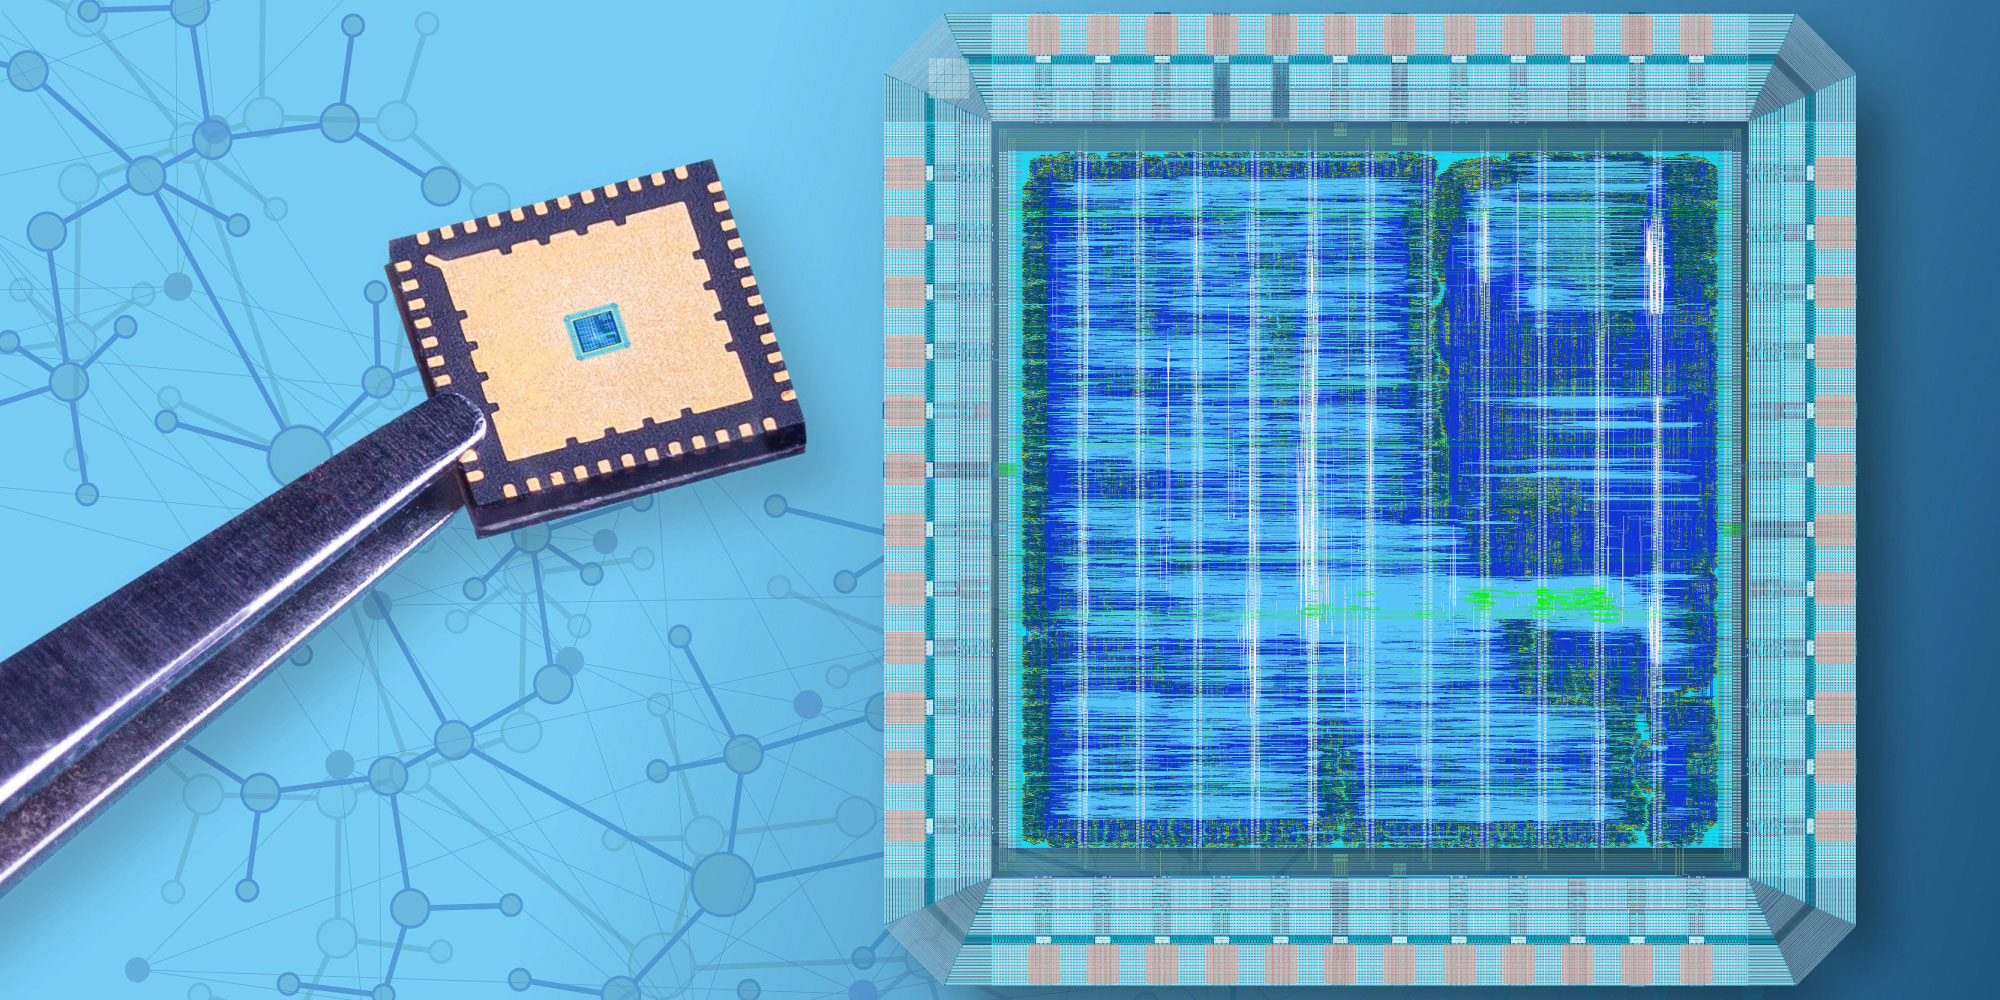 Imec Builds World’s First Spiking Neural Network Based Chip for Radar Signal Processing